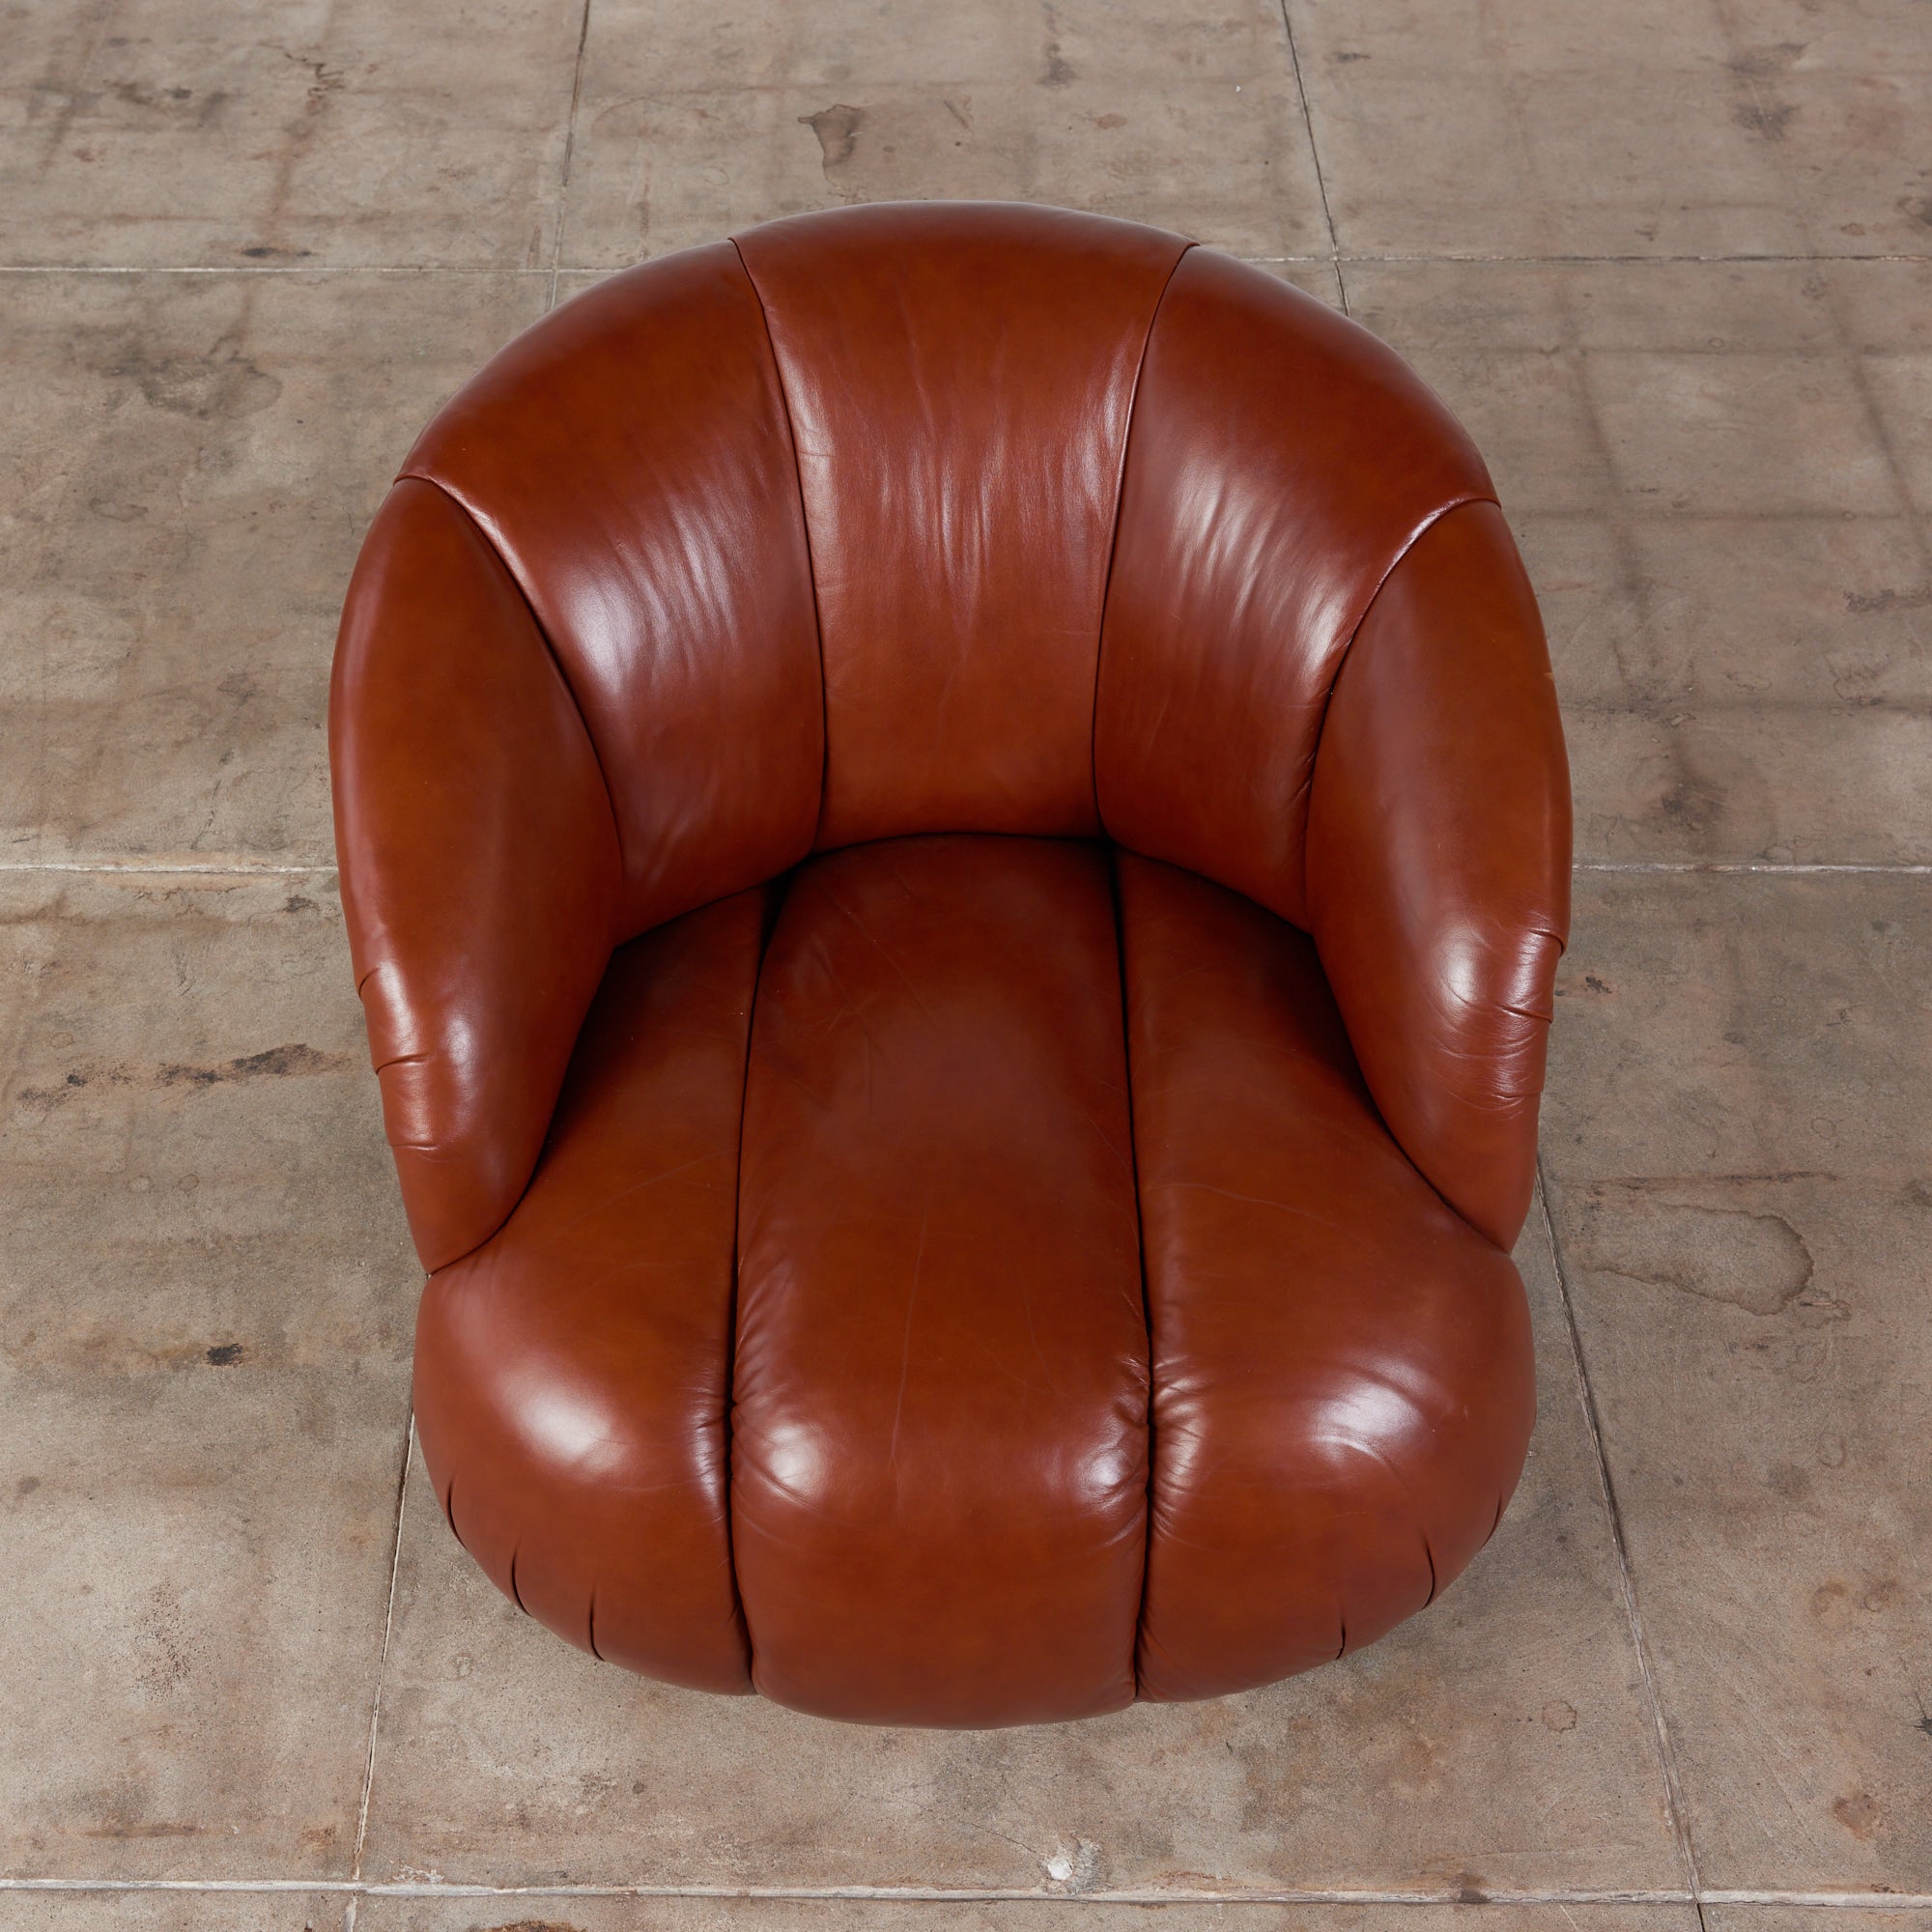 ON HOLD ** Karl Springer Style Leather Swivel Chair